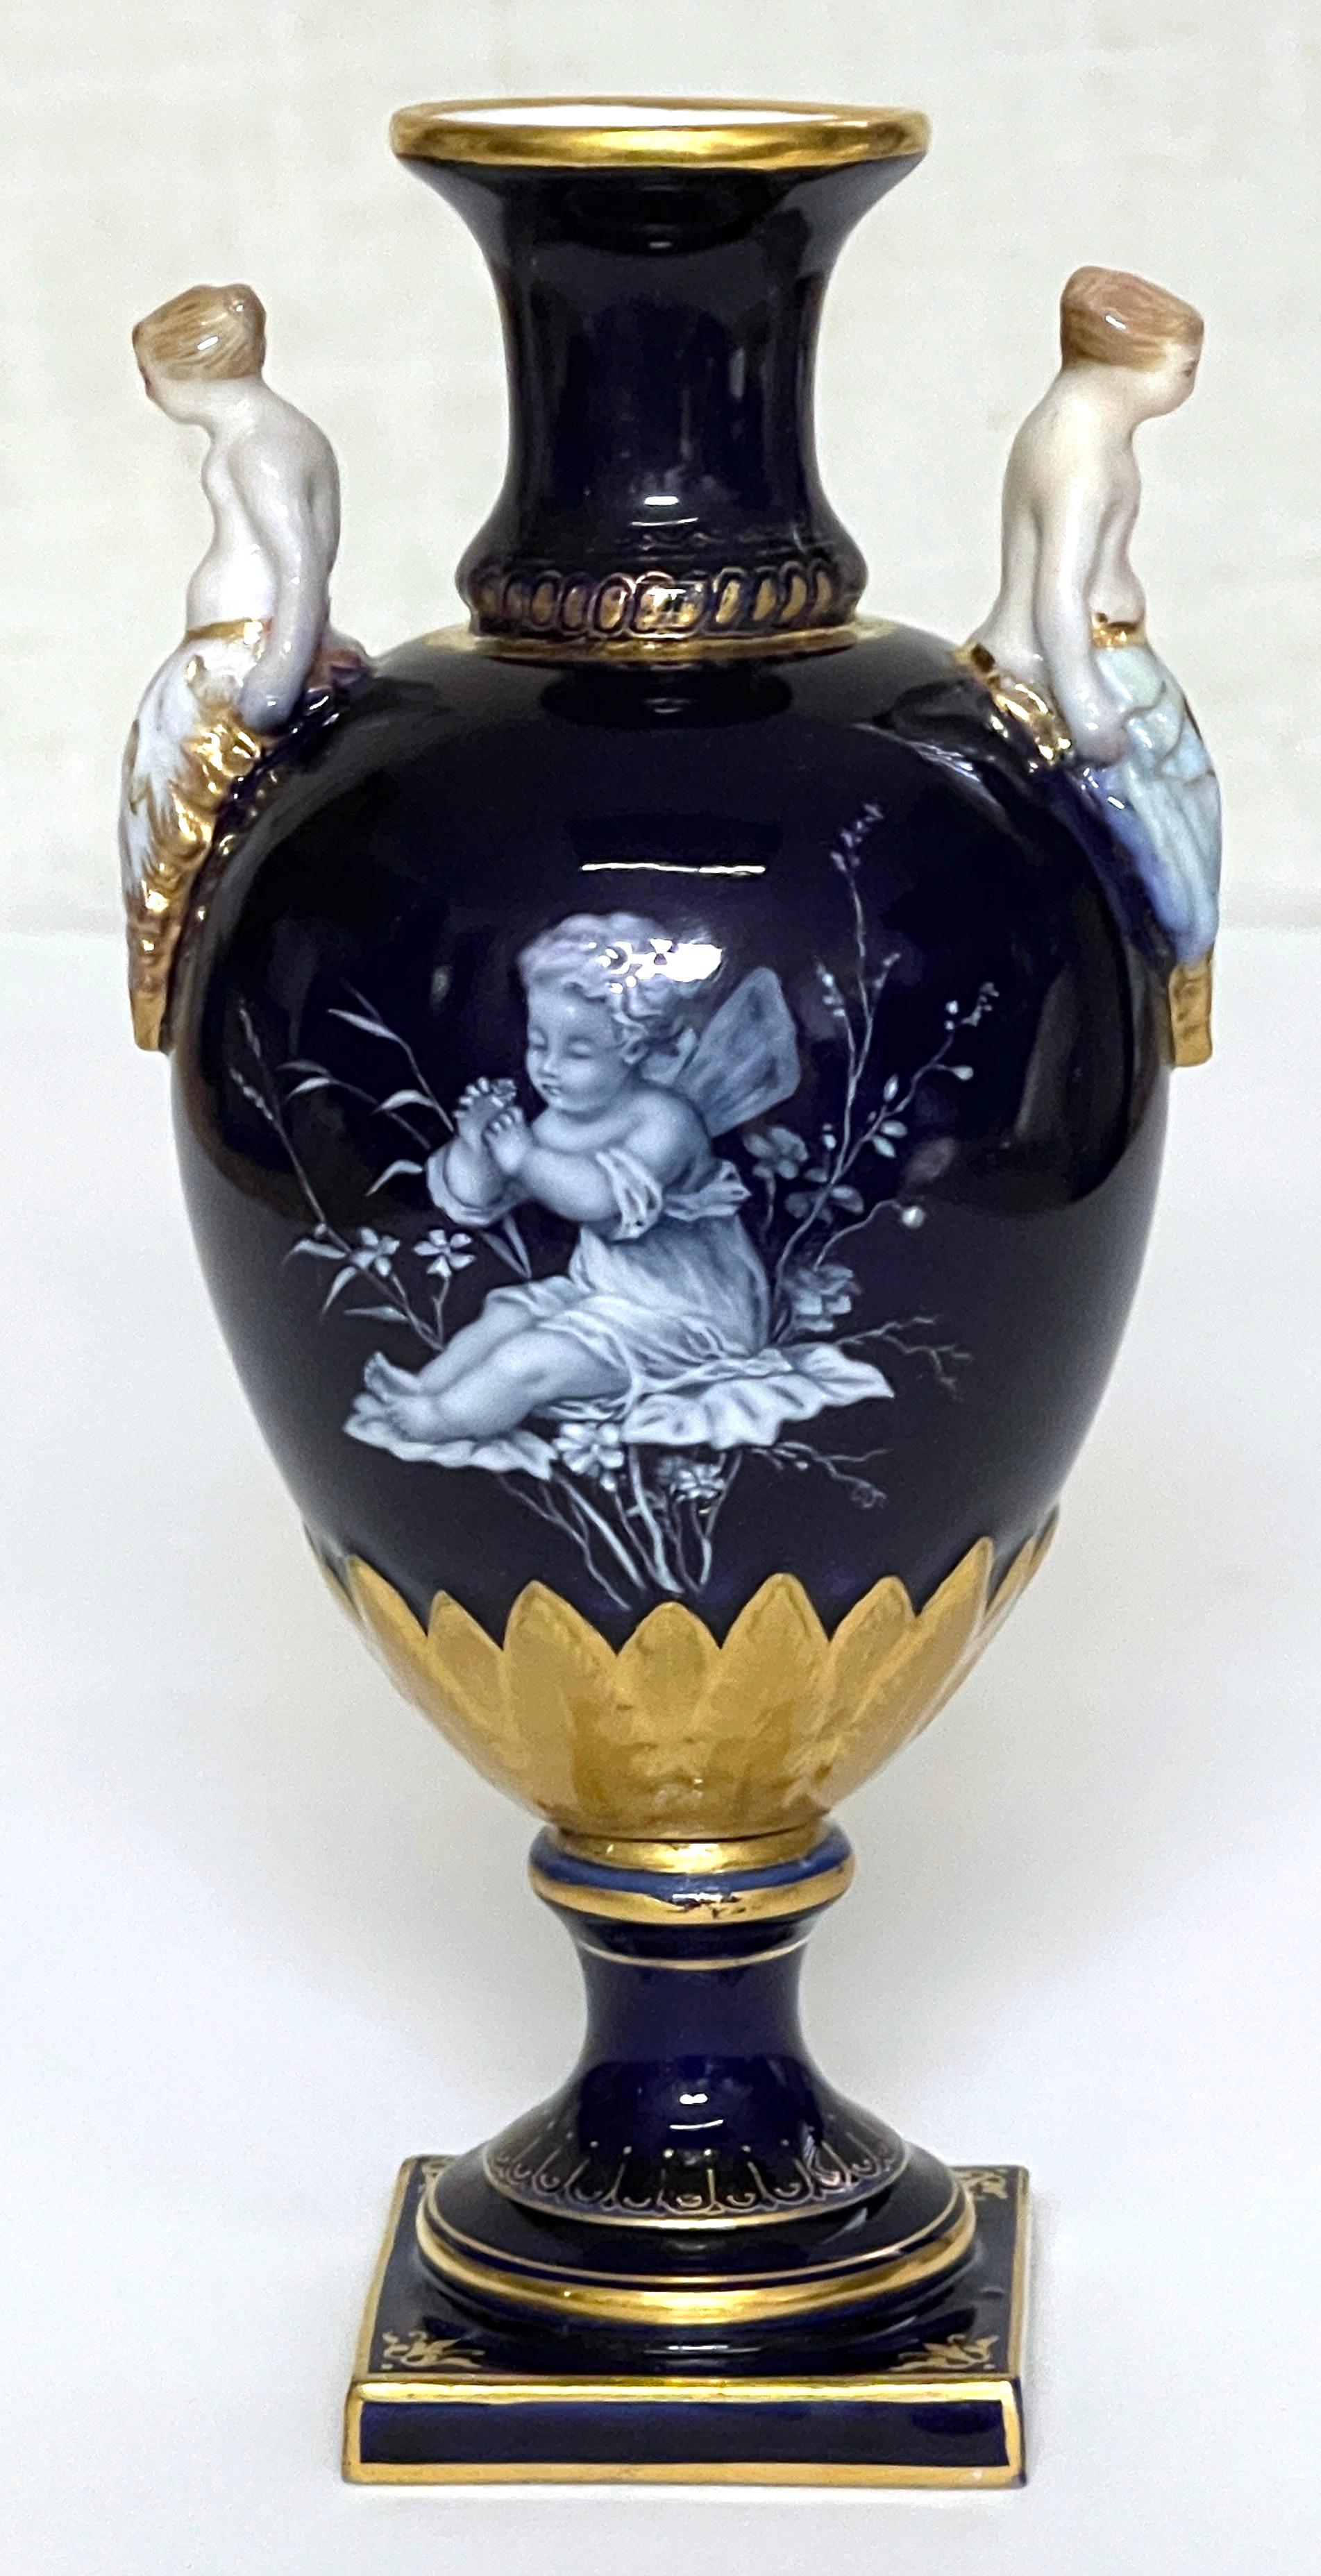 Meissen Cobalt Ground Pâte-sur-pâte Figural Vase, attributed to Leuteritz
Germany, second quarter 19th century 

We are pleased to offer an extraordinary opportunity to acquire one the rarest techniques created by the Meissen factory,